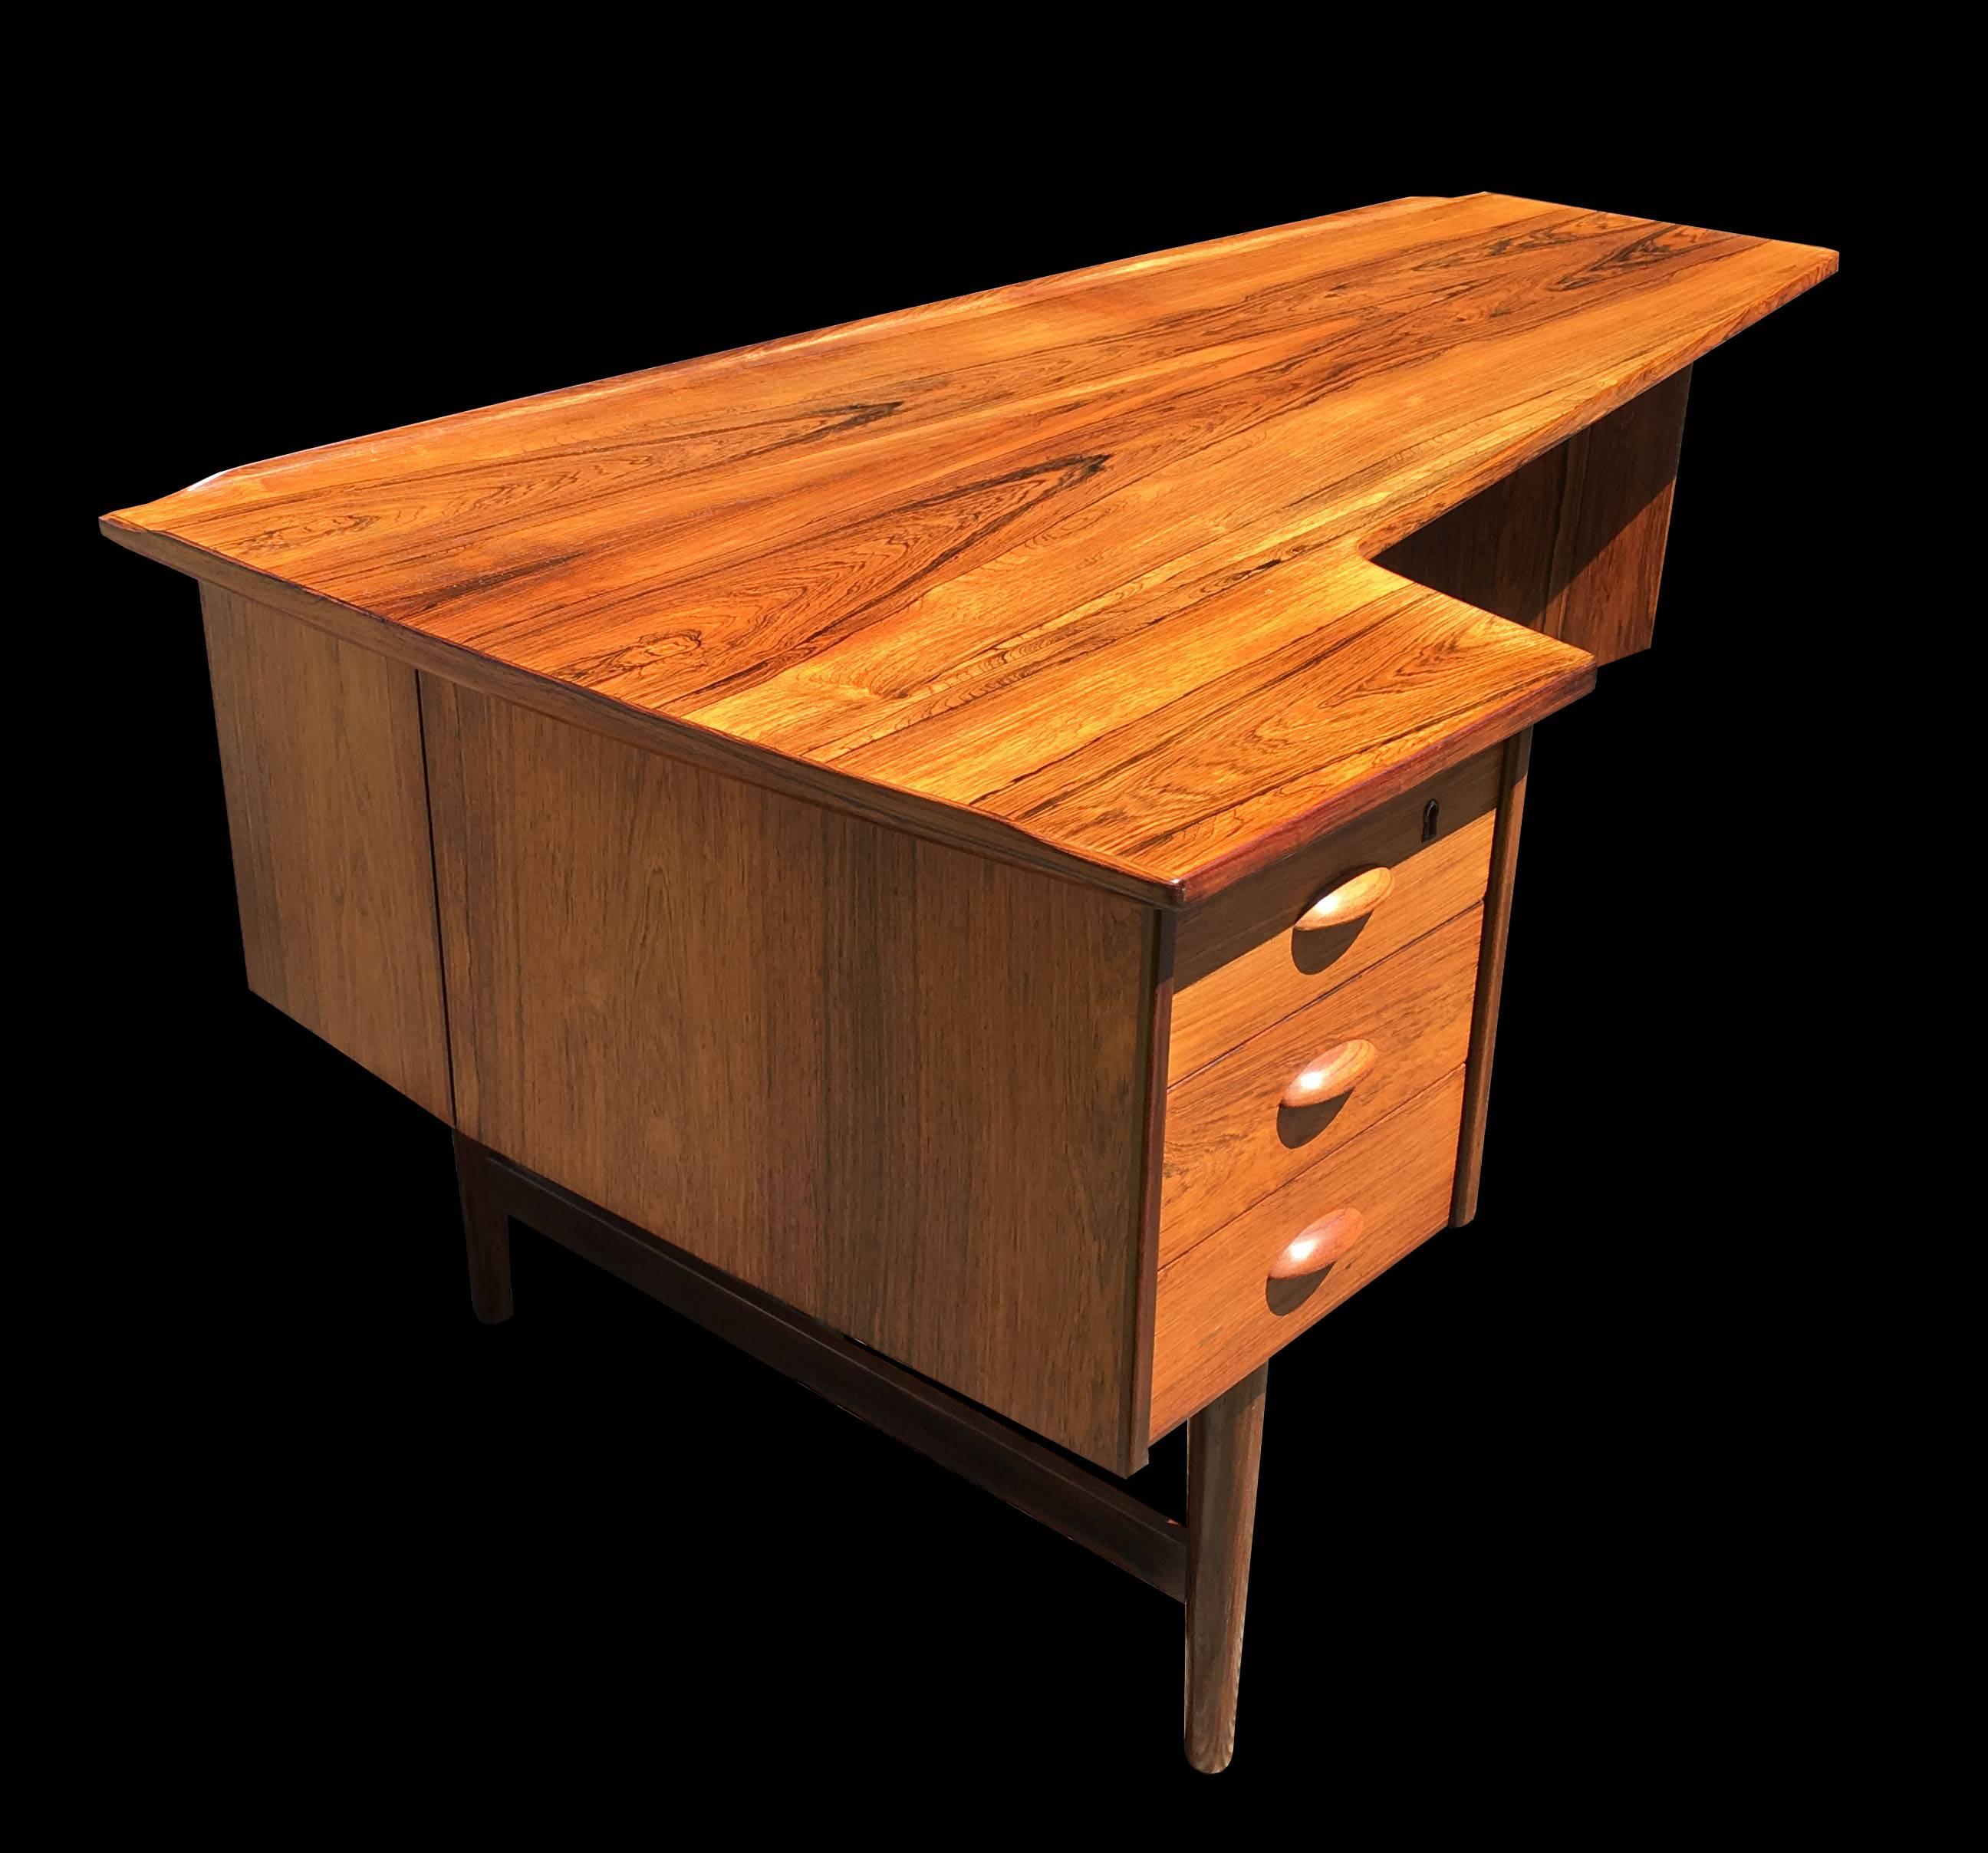 A very good example of this quality desk by Peter Lovig Nielsen, made in Denmark by Hedensted Mobelfabrik, three drawers on one side, and an open bookshelf and small mirror backed cocktail cupboard on the reverse. All on four turned legs with